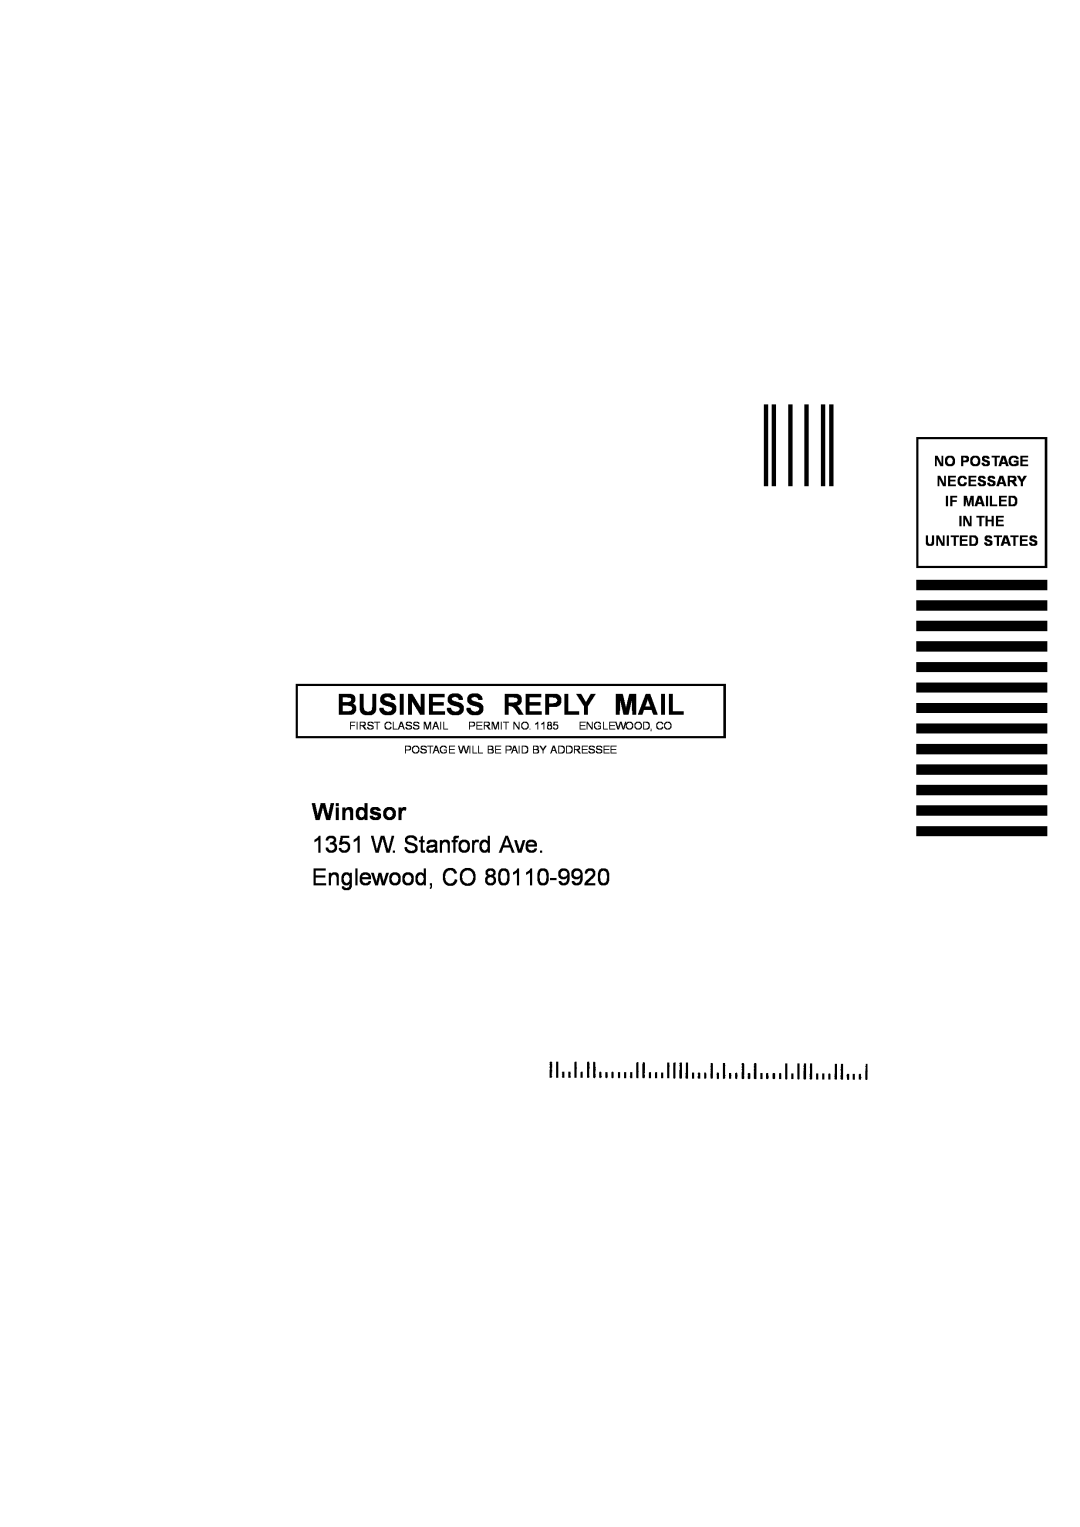 Windsor 10120300 Business Reply Mail, Windsor, 1351 W. Stanford Ave Englewood, CO, No Postage Necessary If Mailed In The 